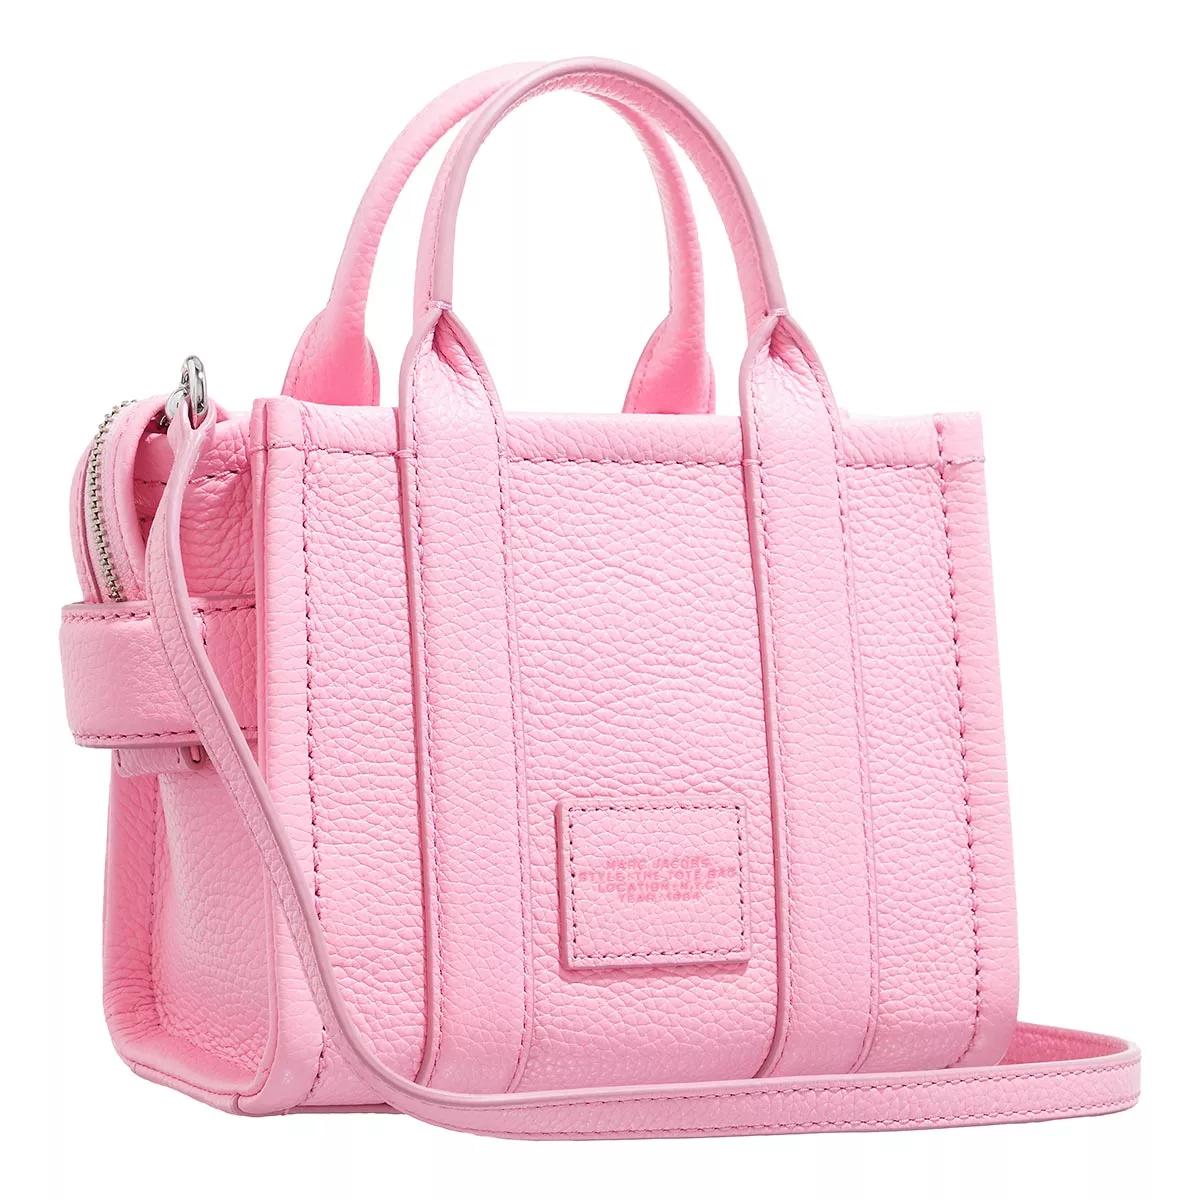 Marc Jacobs Totes The Tote Bag Leather in roze